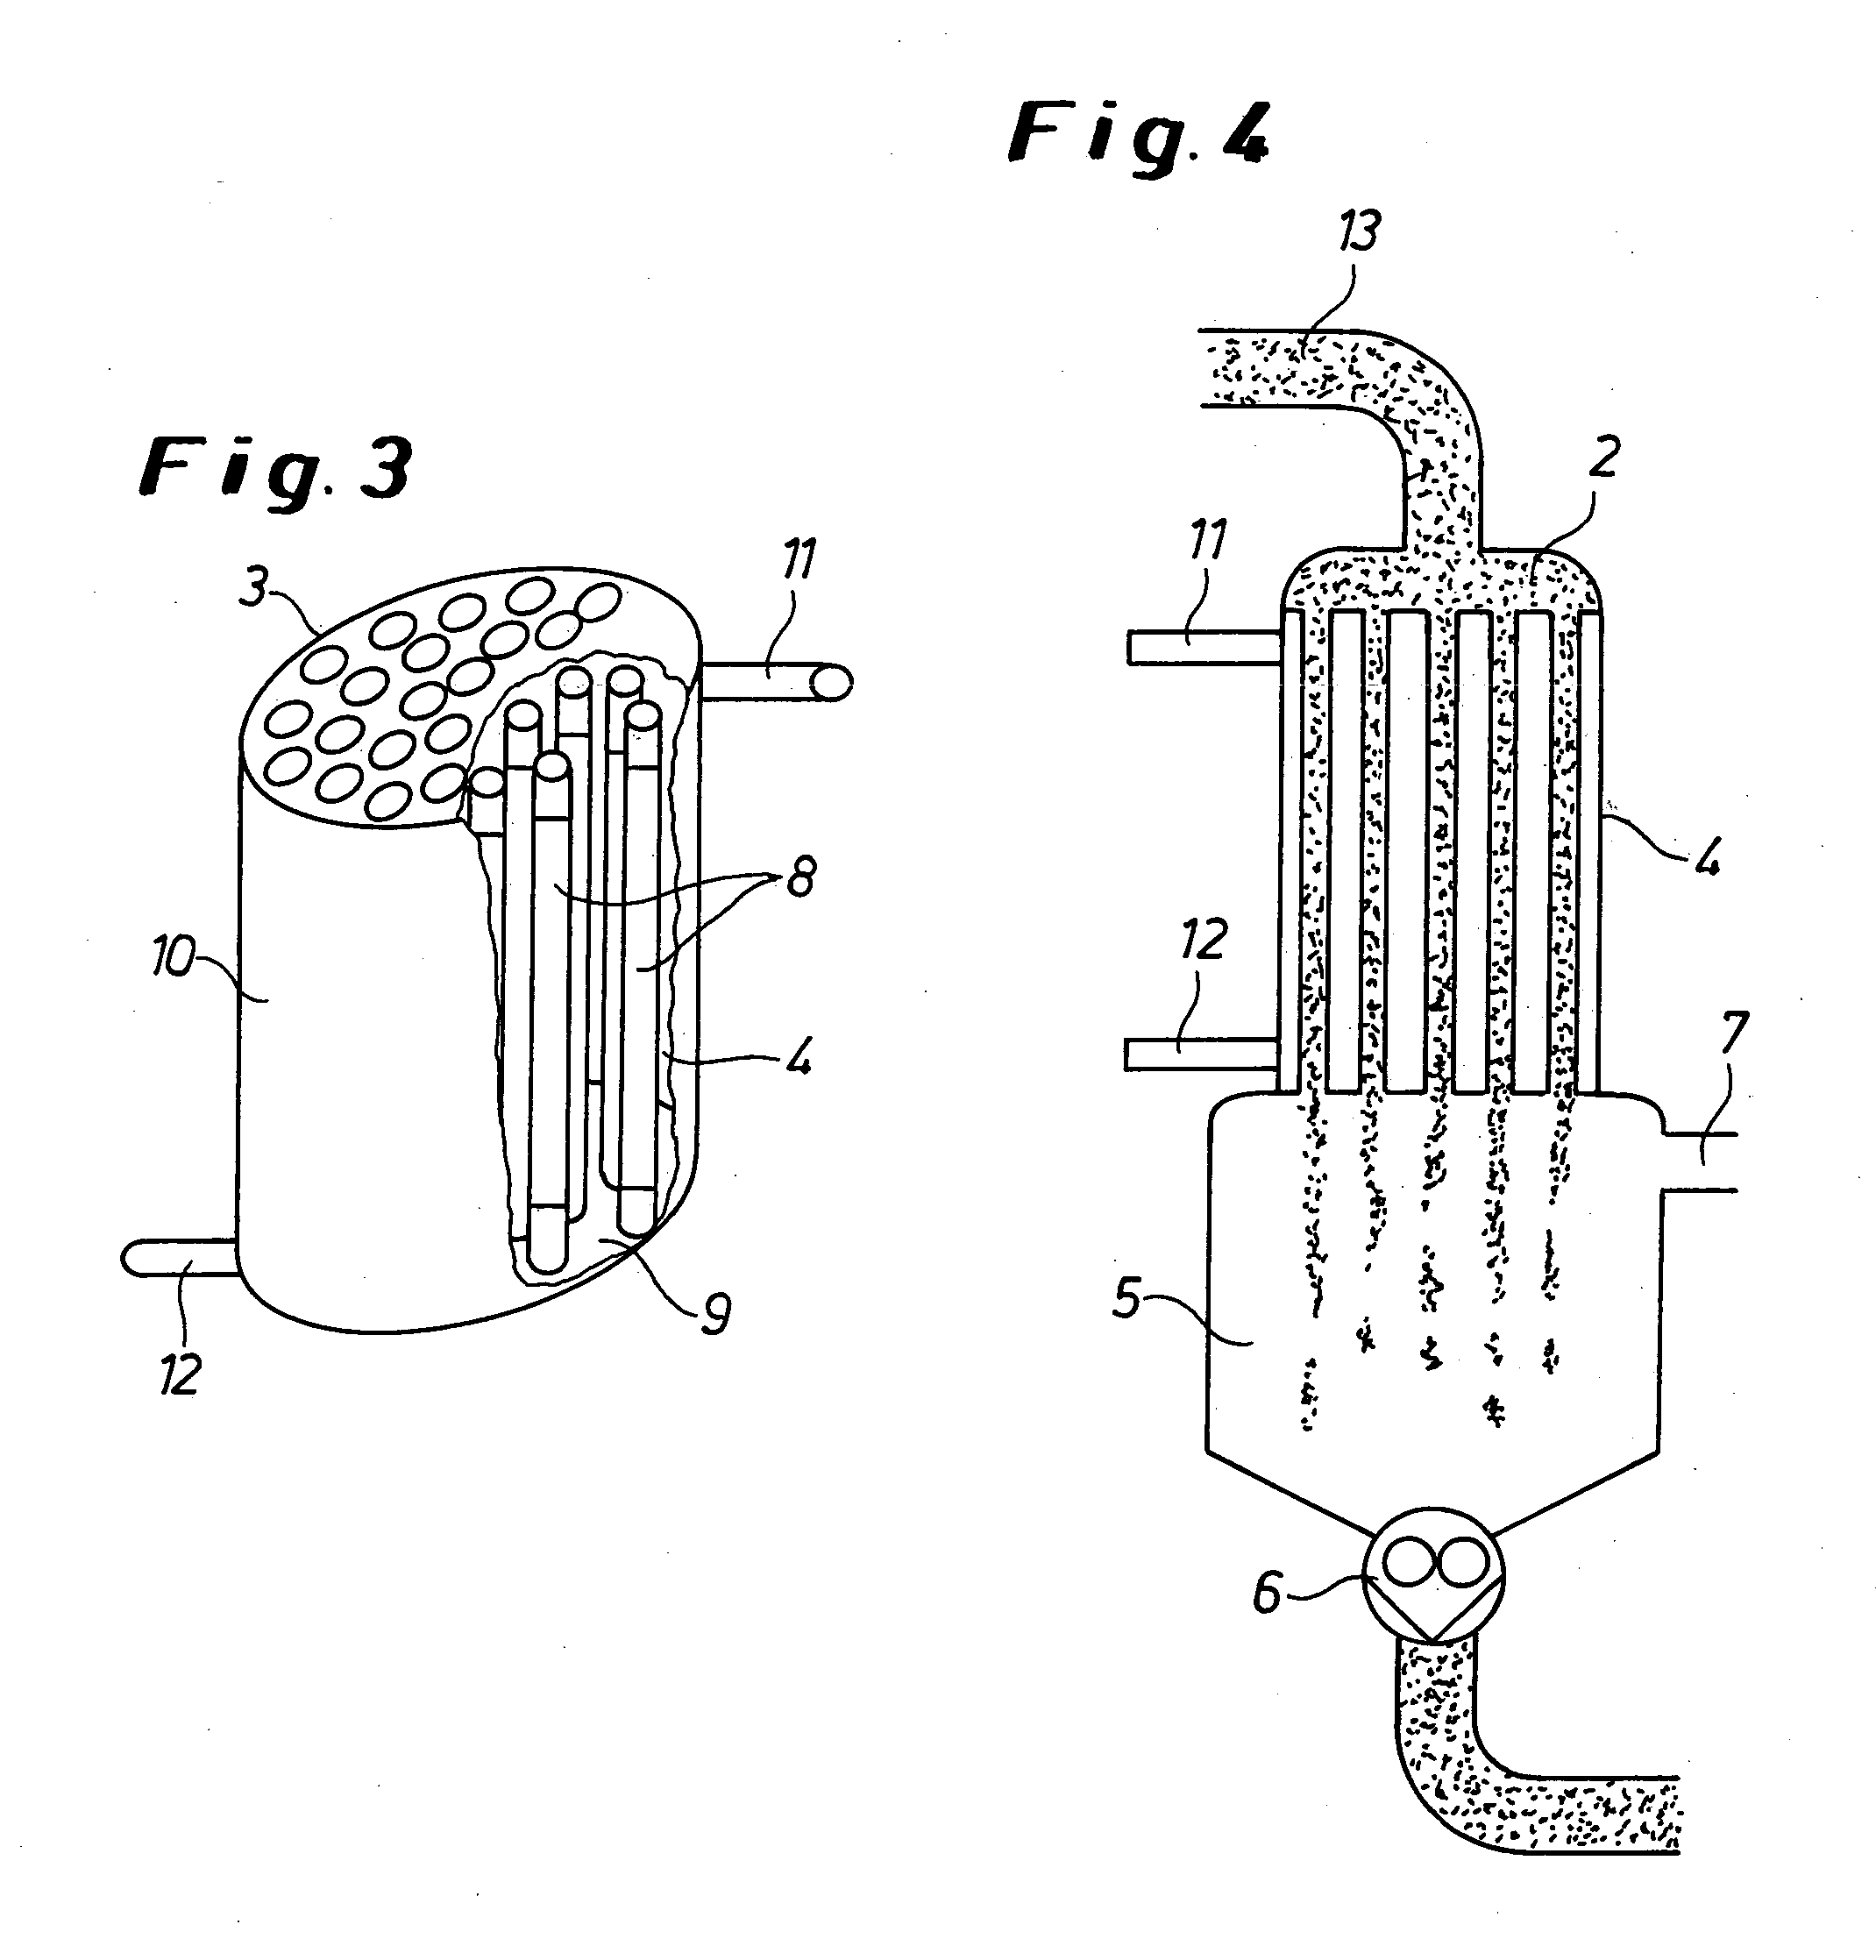 Process and apparatus for removing volatile substances from highly viscous media